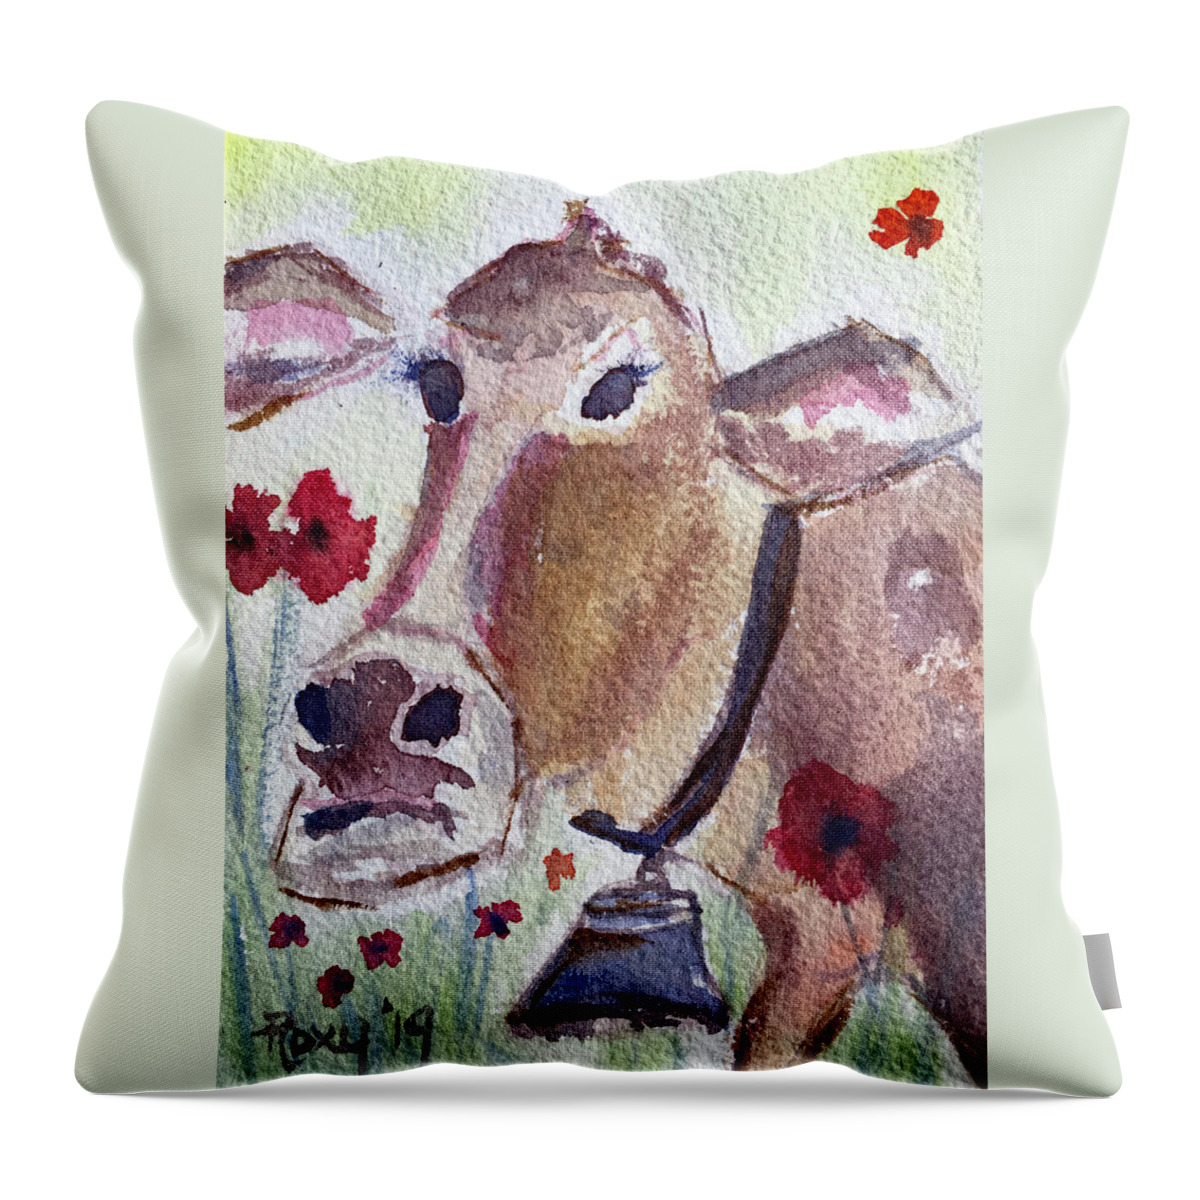 Watercolor Throw Pillow featuring the painting Belle by Roxy Rich